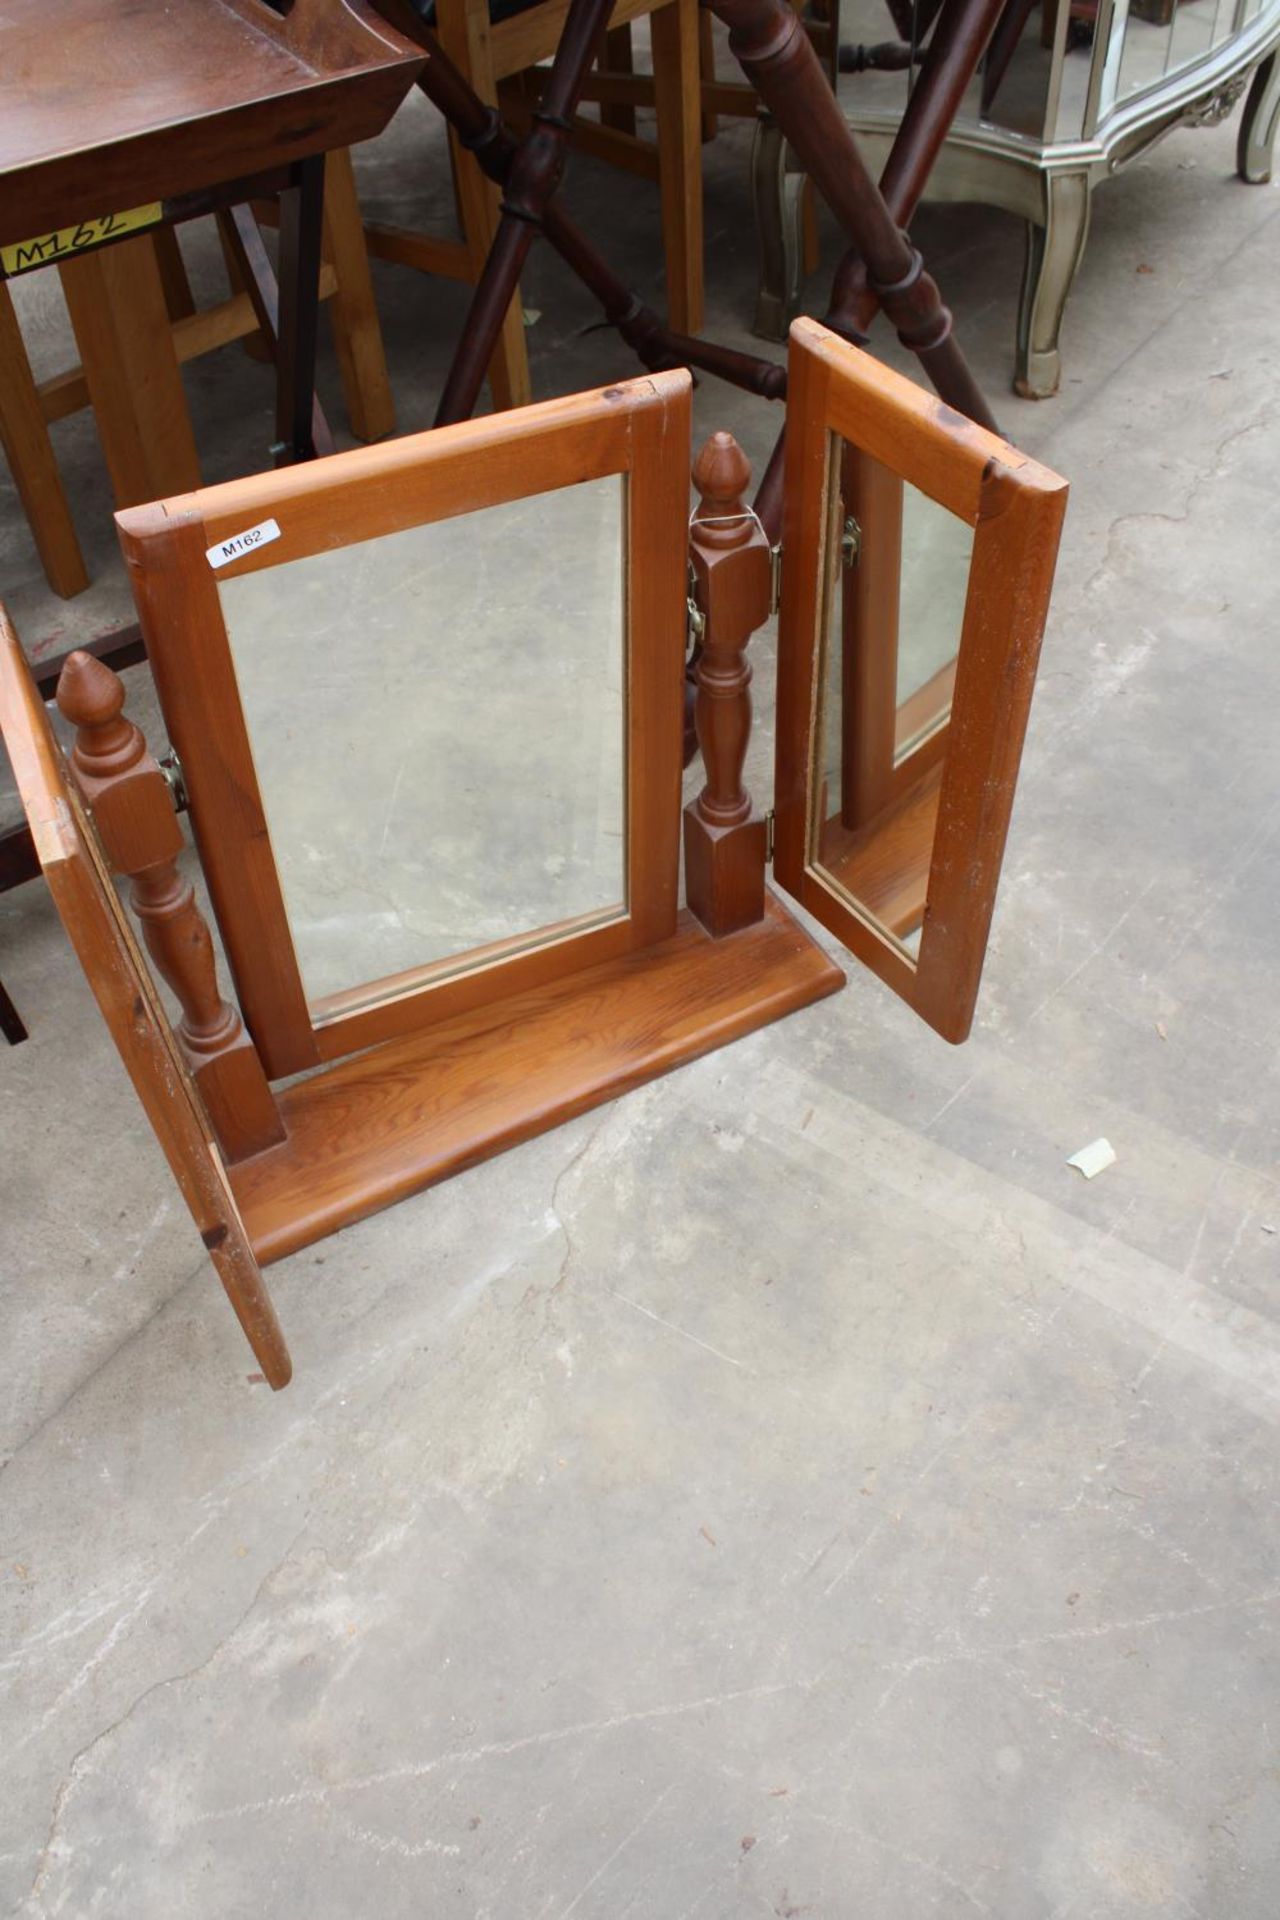 TWO GEORGIAN STYLE BUTLERS TRAYS ON FOLDING STANDS AND A PINE TRIPLE MIRROR - Image 4 of 5